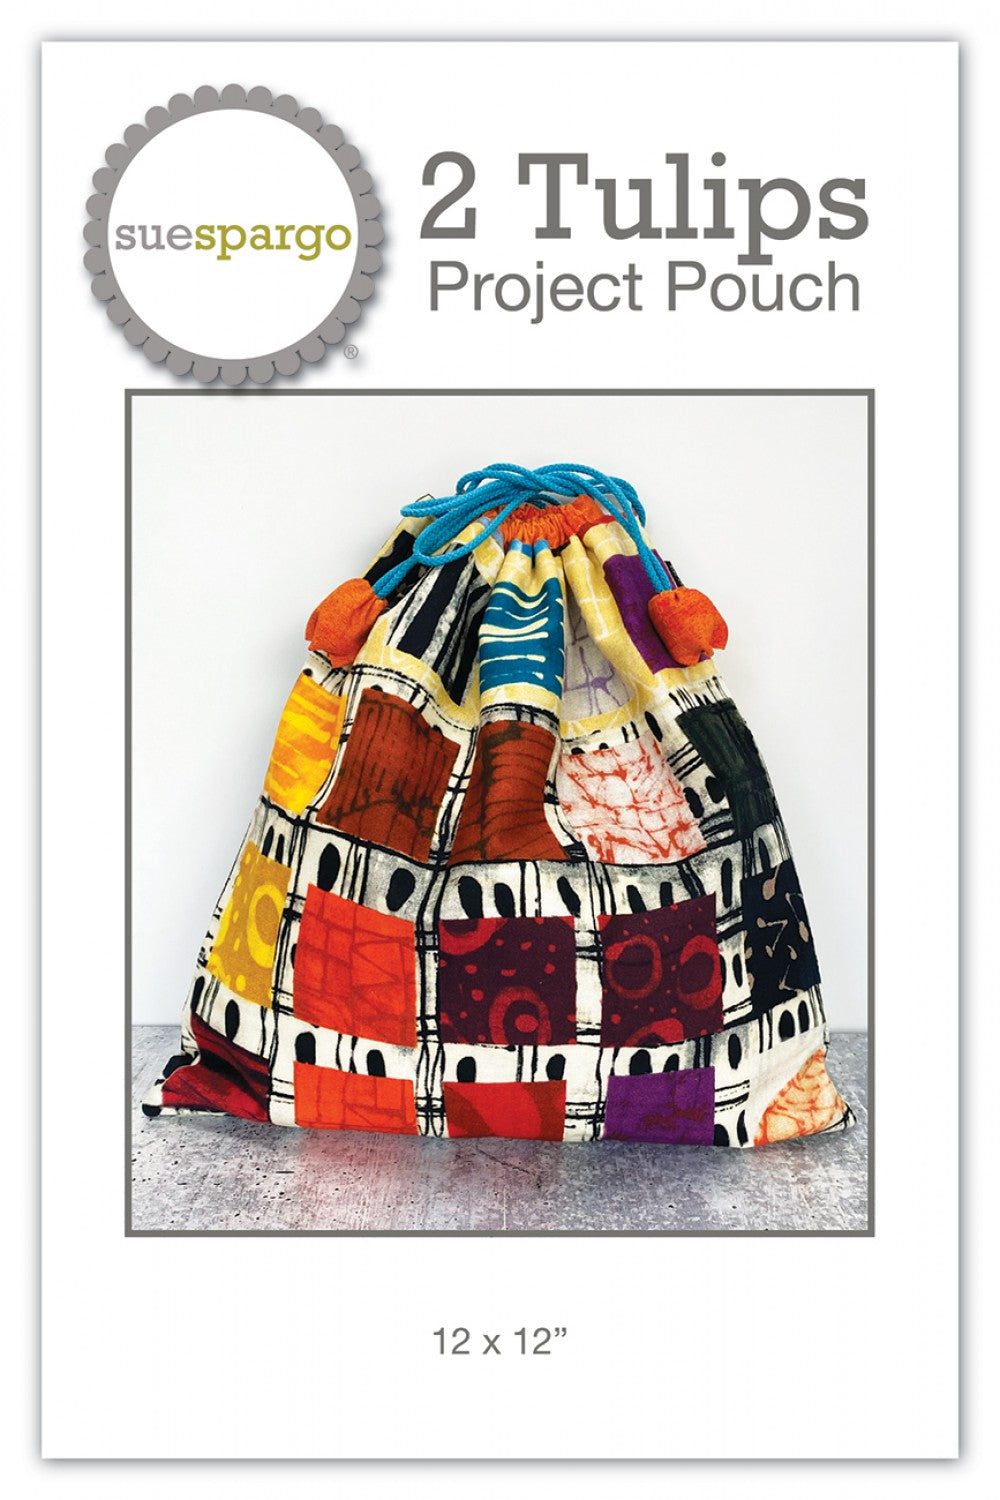 2 Tulips Project Pouch - Applique, Embroidery, and Sewing Pattern by Sue Spargo of Folk Art Quilts